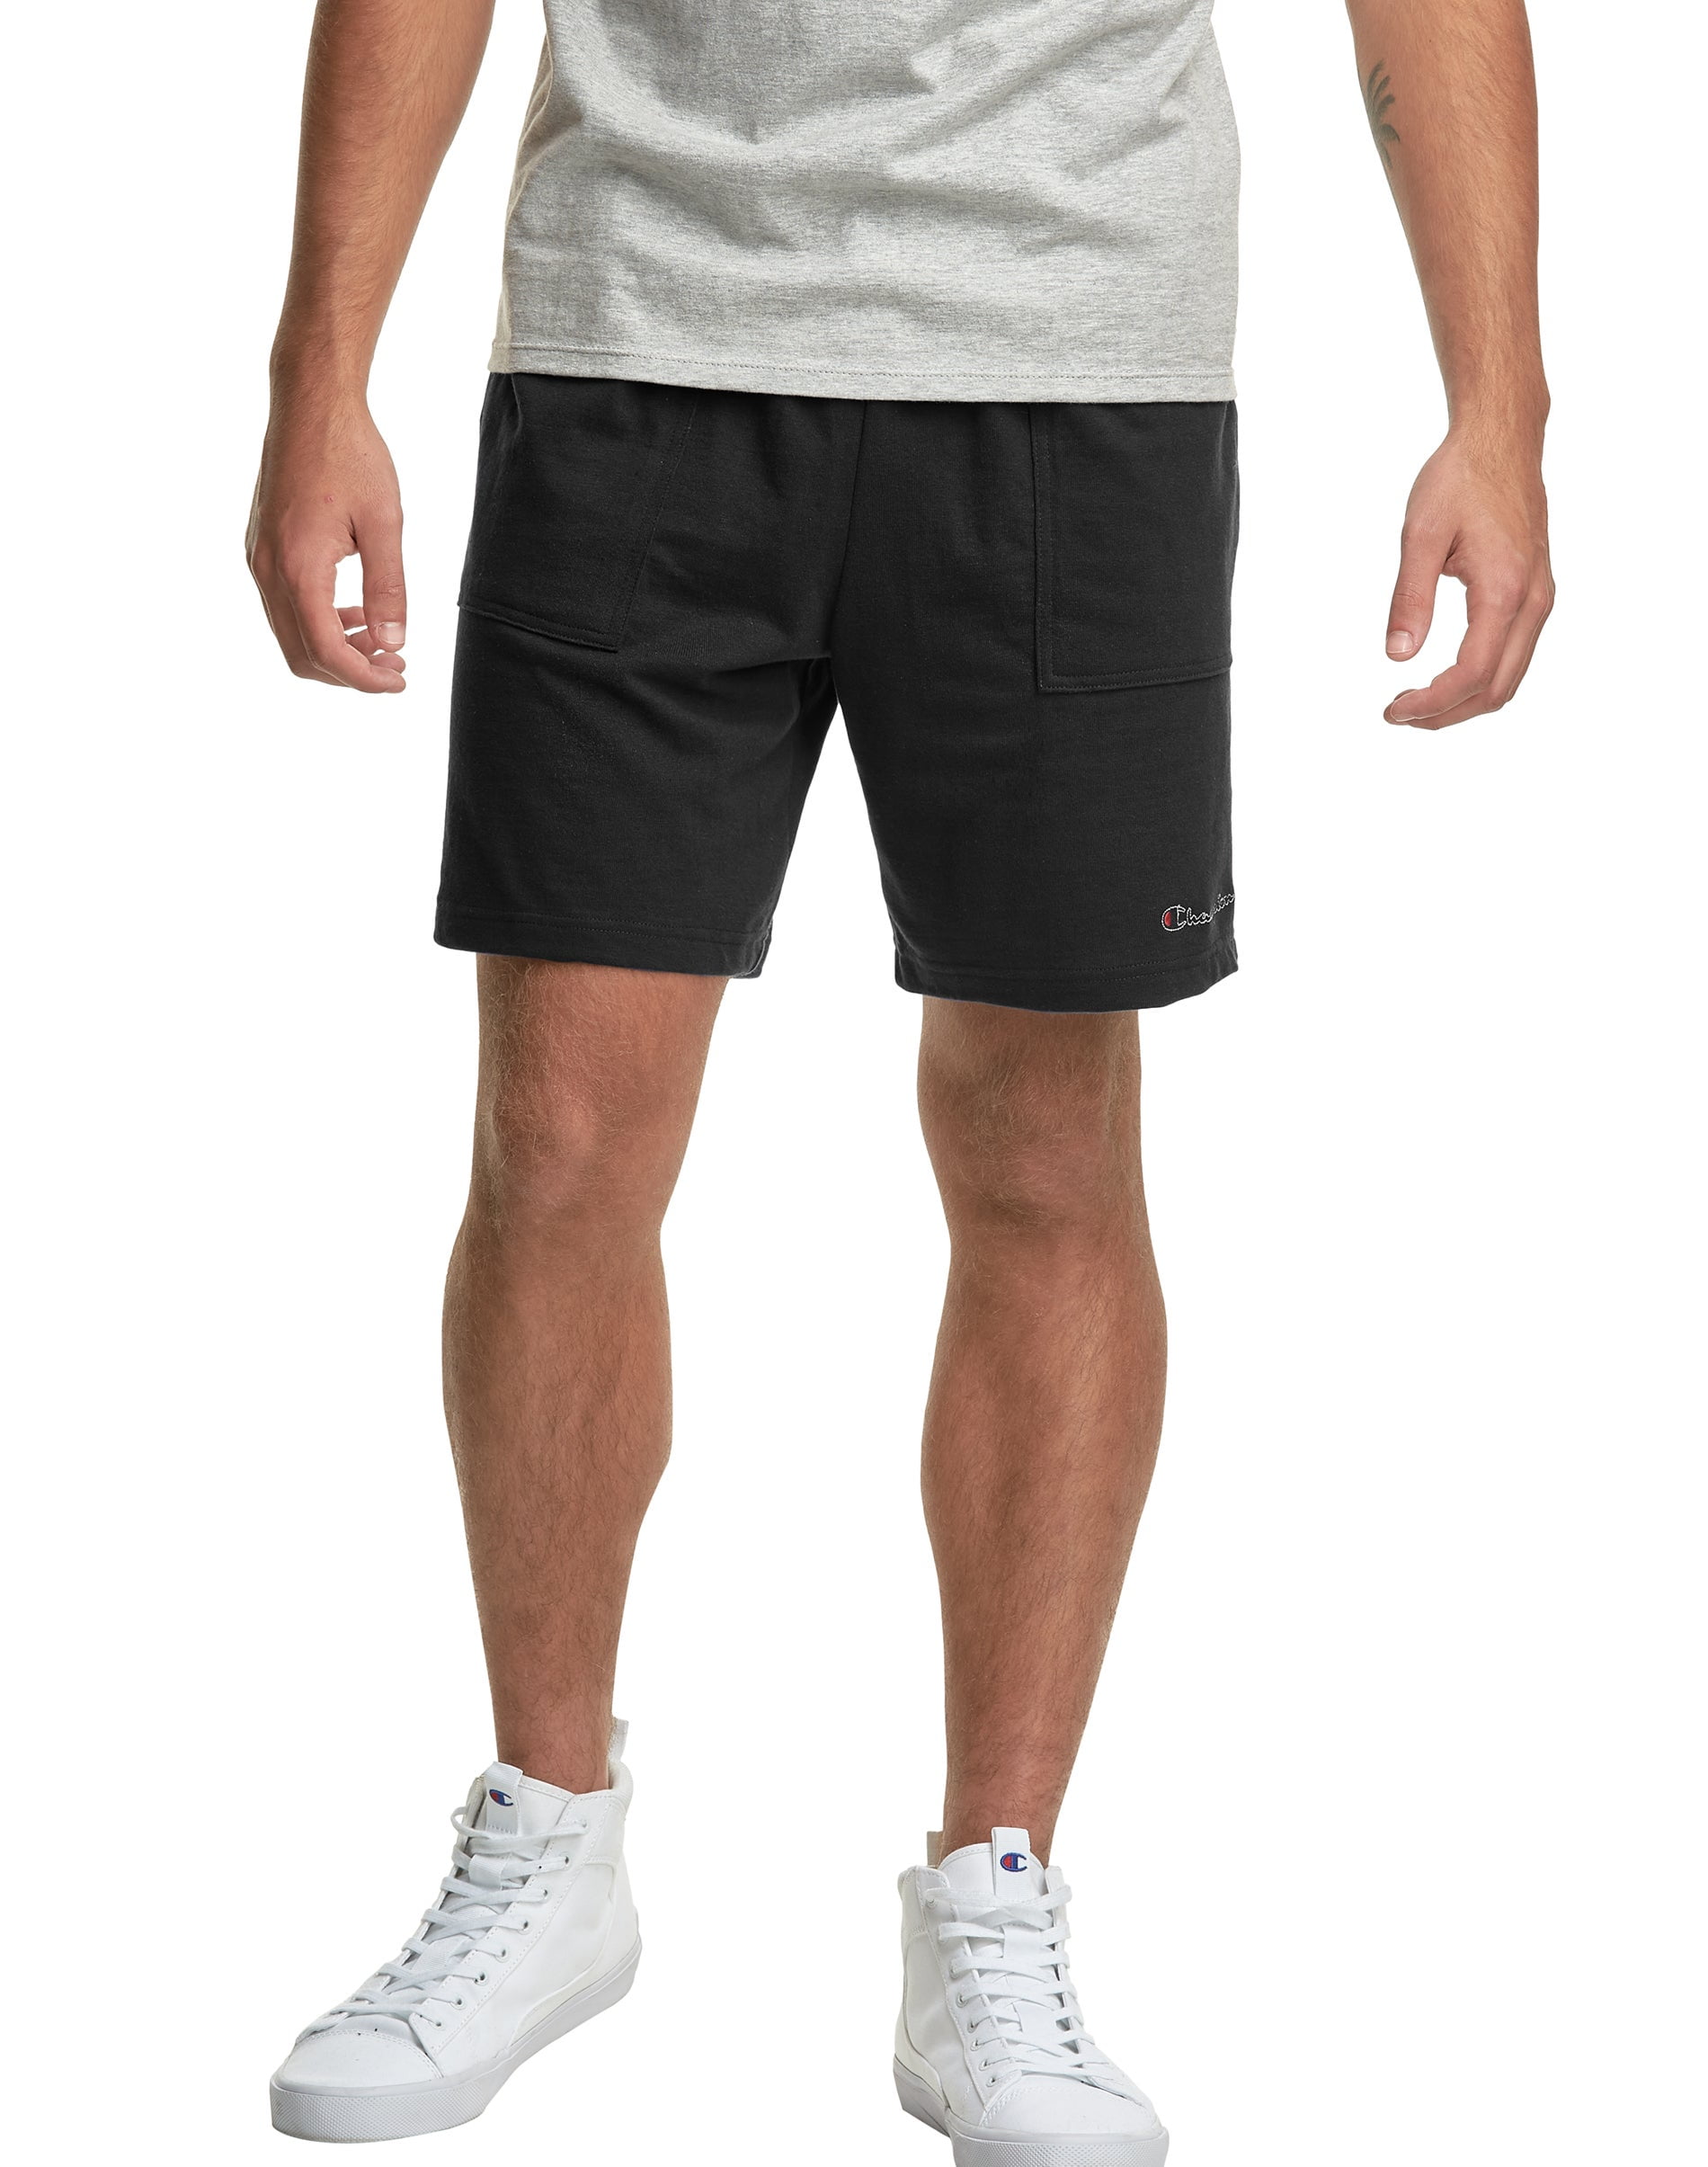 LRD Mens Performance Workout Shorts with Compression Liner 7 inch Inseam 